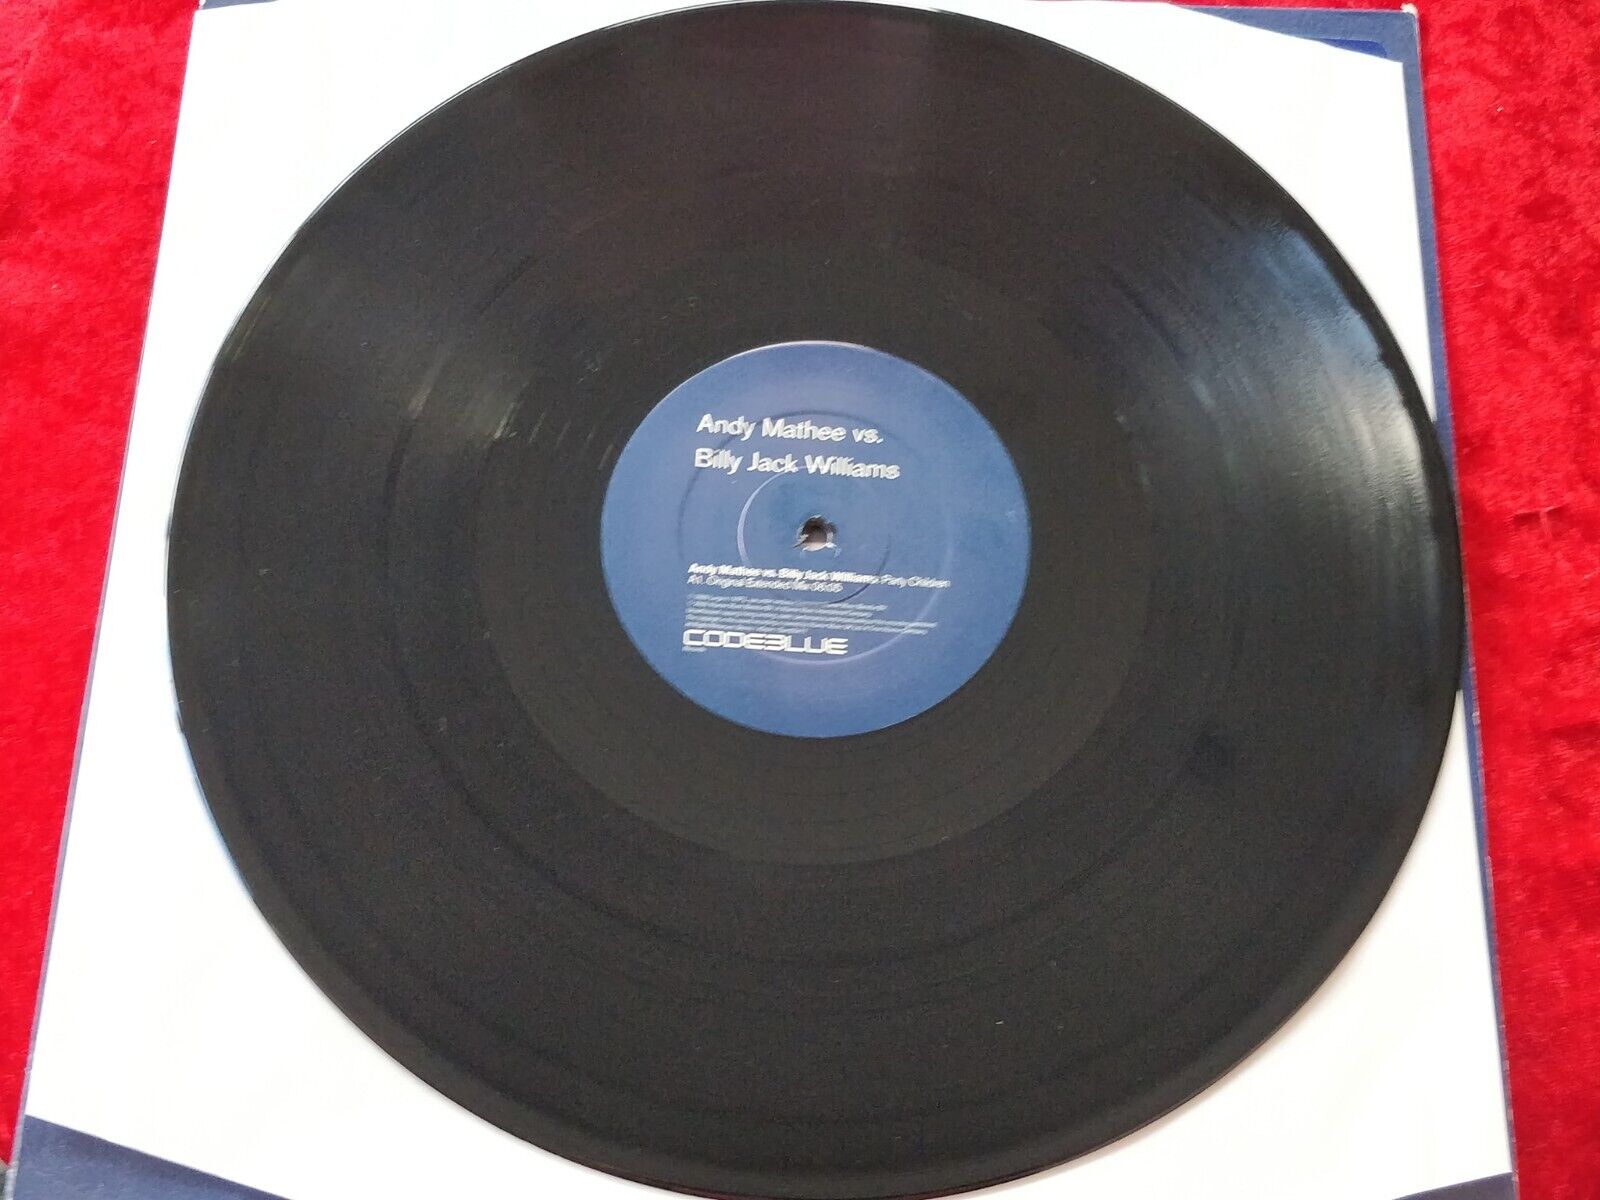 ANDY MATHEE vs BILLY JACK WILLIAMS  Party Children UK 4-track promo 12" Codeblue